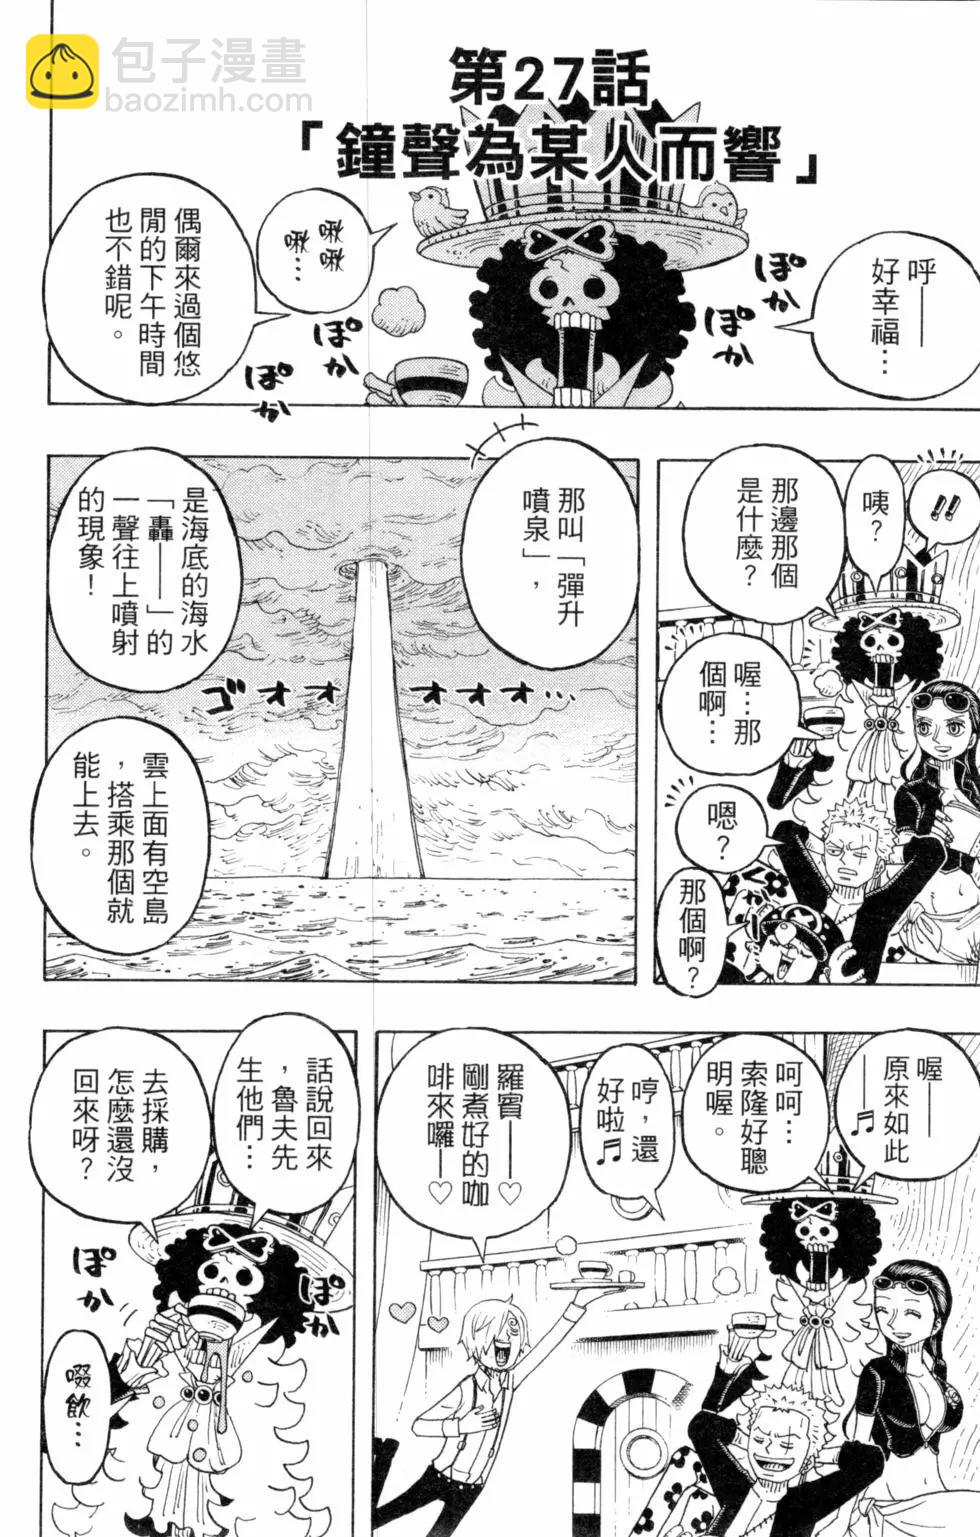 One piece party - 第06卷(2/4) - 3